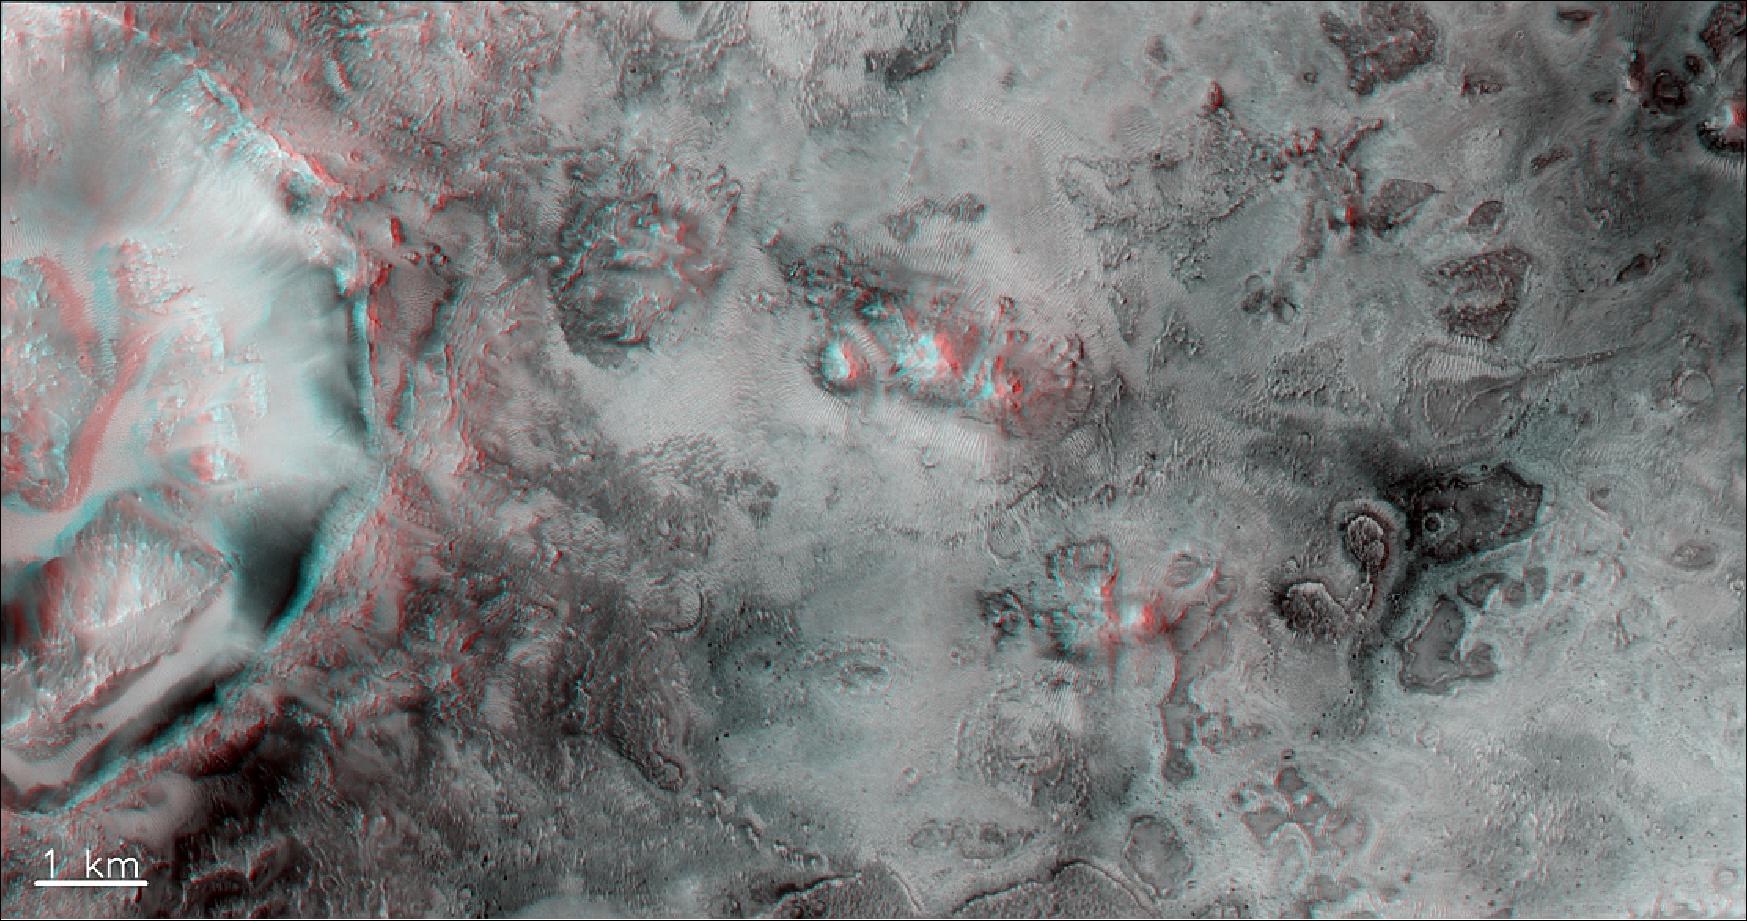 Figure 82: A portion of a crater (left) and rough terrain outside the crater at the boundary between the Syrtis and Isidis regions of Mars, south of the landing site foreseen for NASA’s Mars 2020 rover in Jezero Crater. Use red-blue stereo ‘3D’ glasses to best enjoy this view. It was created from a stereo pair taken by the CaSSIS instrument onboard the ESA-Roscosmos ExoMars TGO on 29 December 2018. The image is centered at 20.73ºN/79.27ºE and measures about 7 km on the short side (image credit: ESA/Roscosmos/CaSSIS, CC BY-SA 3.0 IGO)